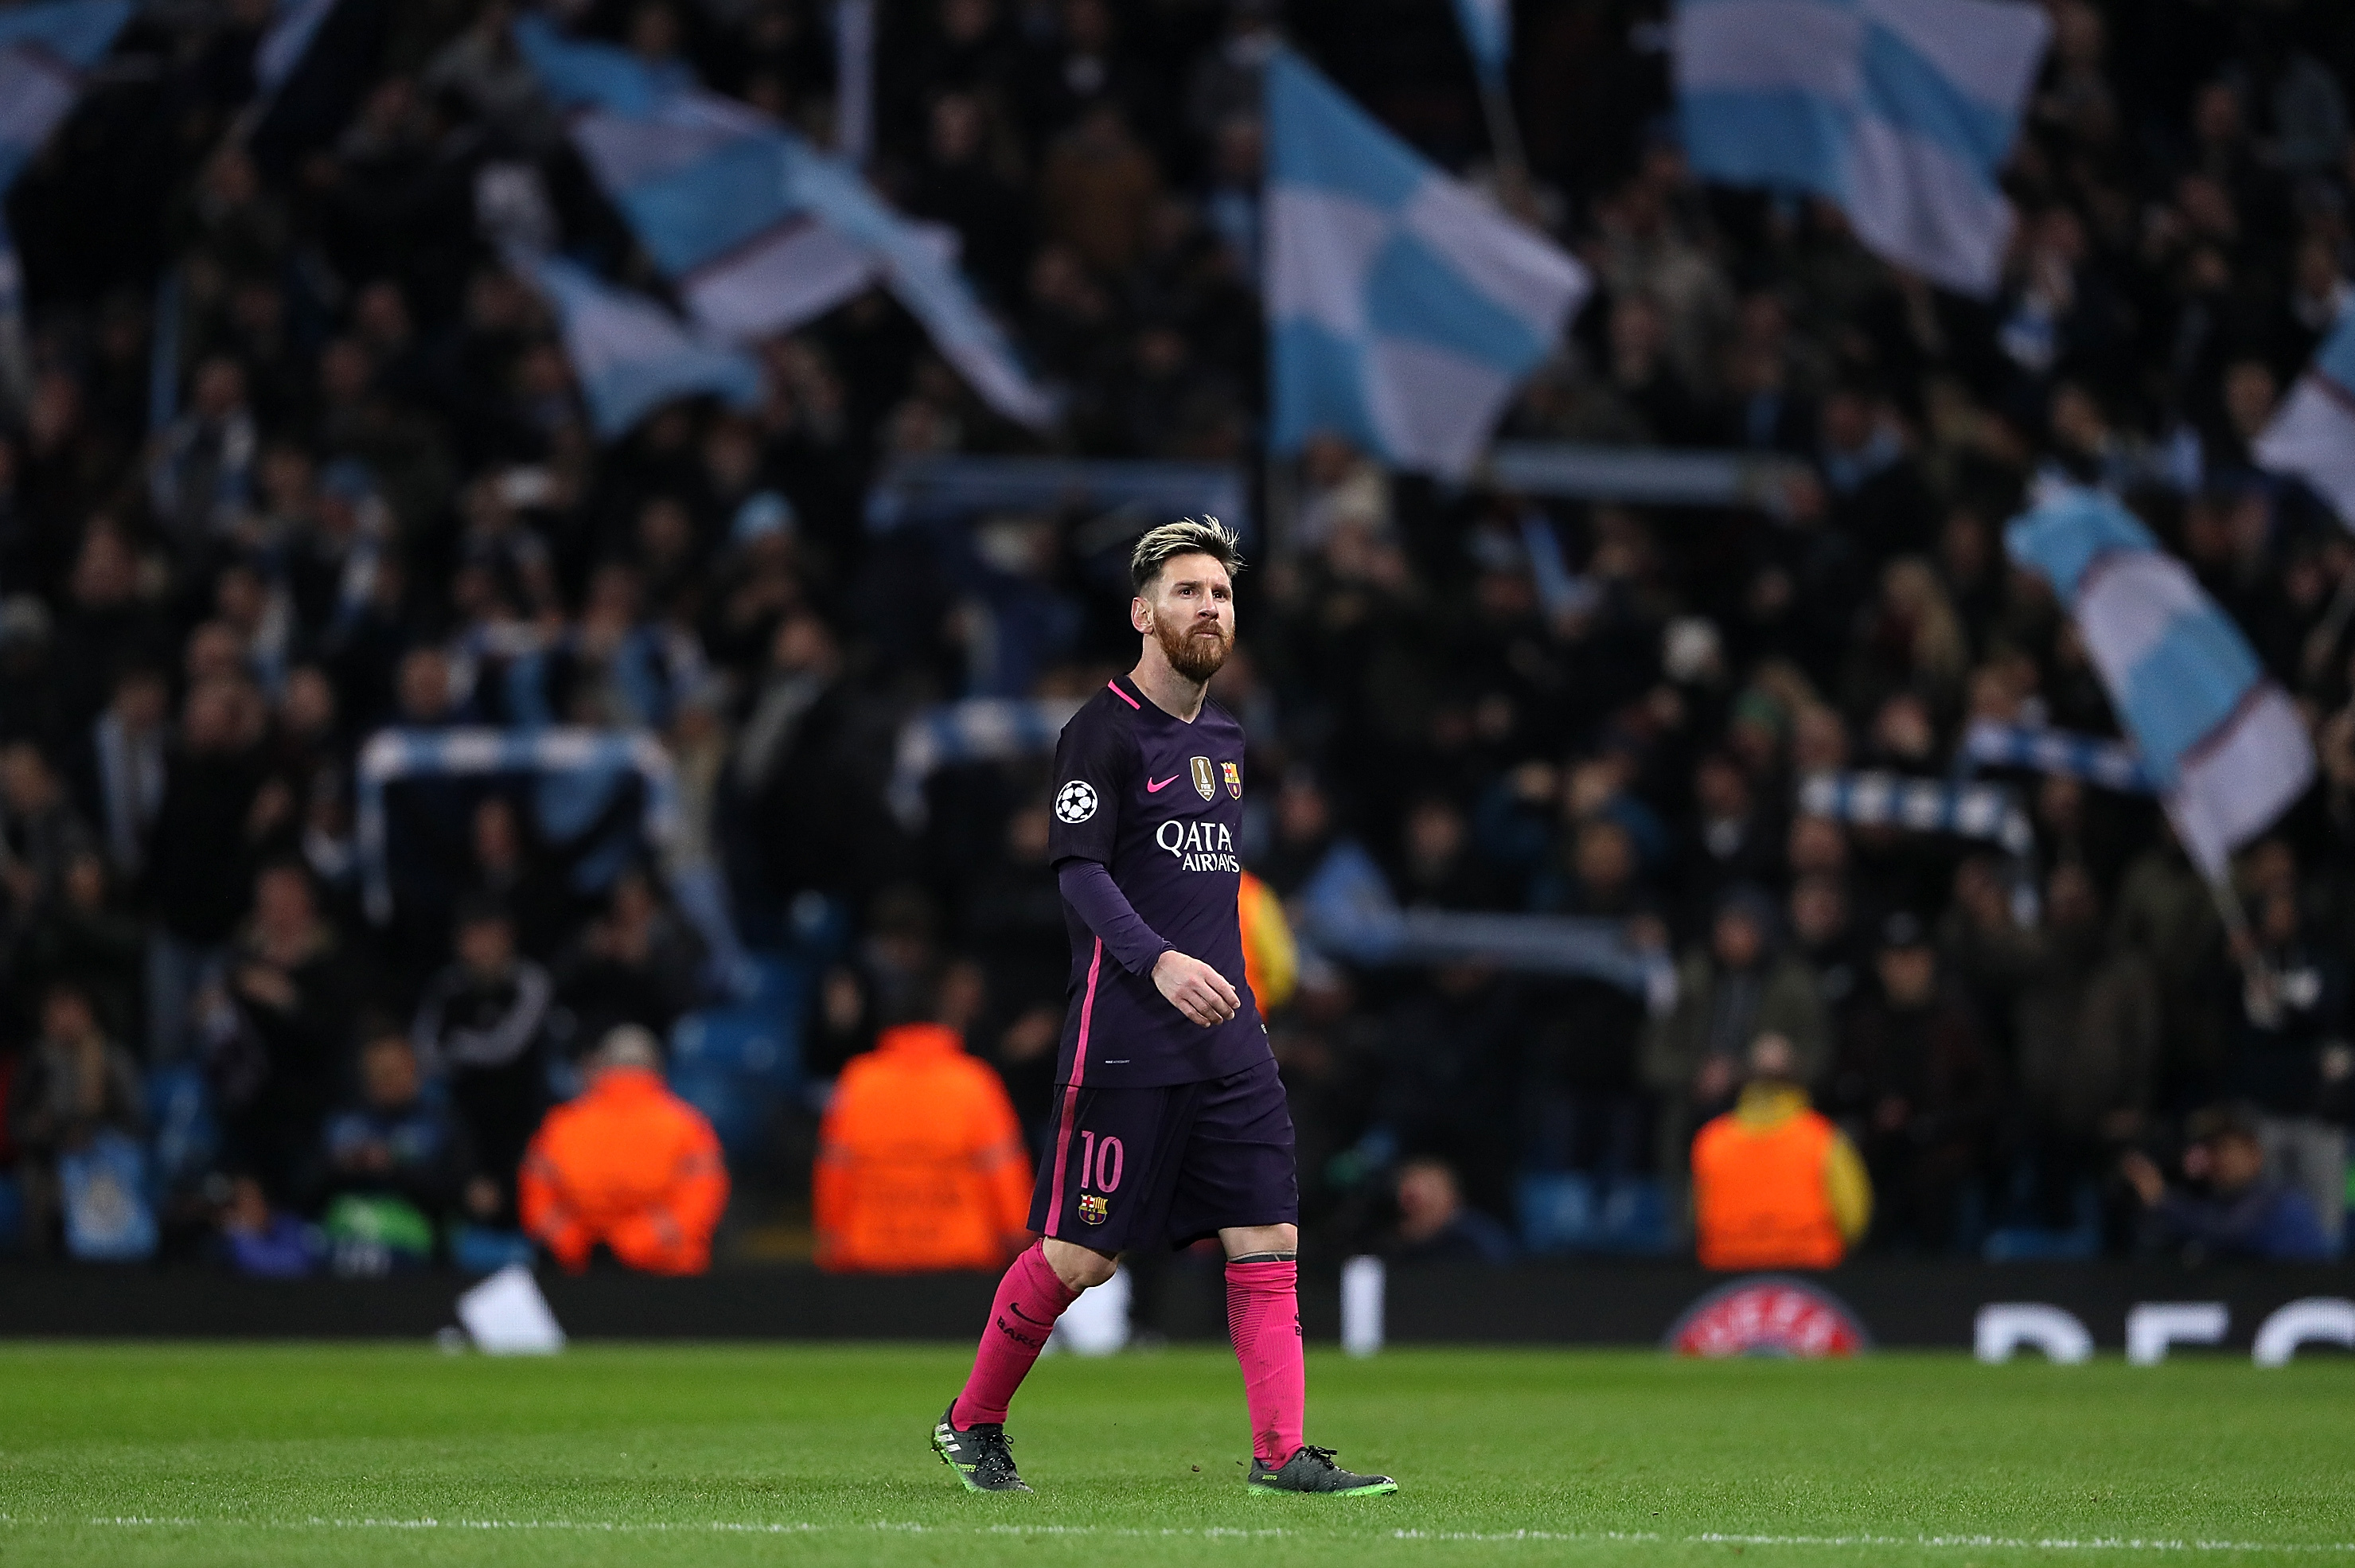 Lionel Messi, Mikel Arteta Argument Reported After Manchester City vs.  Barcelona | Bleacher Report | Latest News, Videos and Highlights